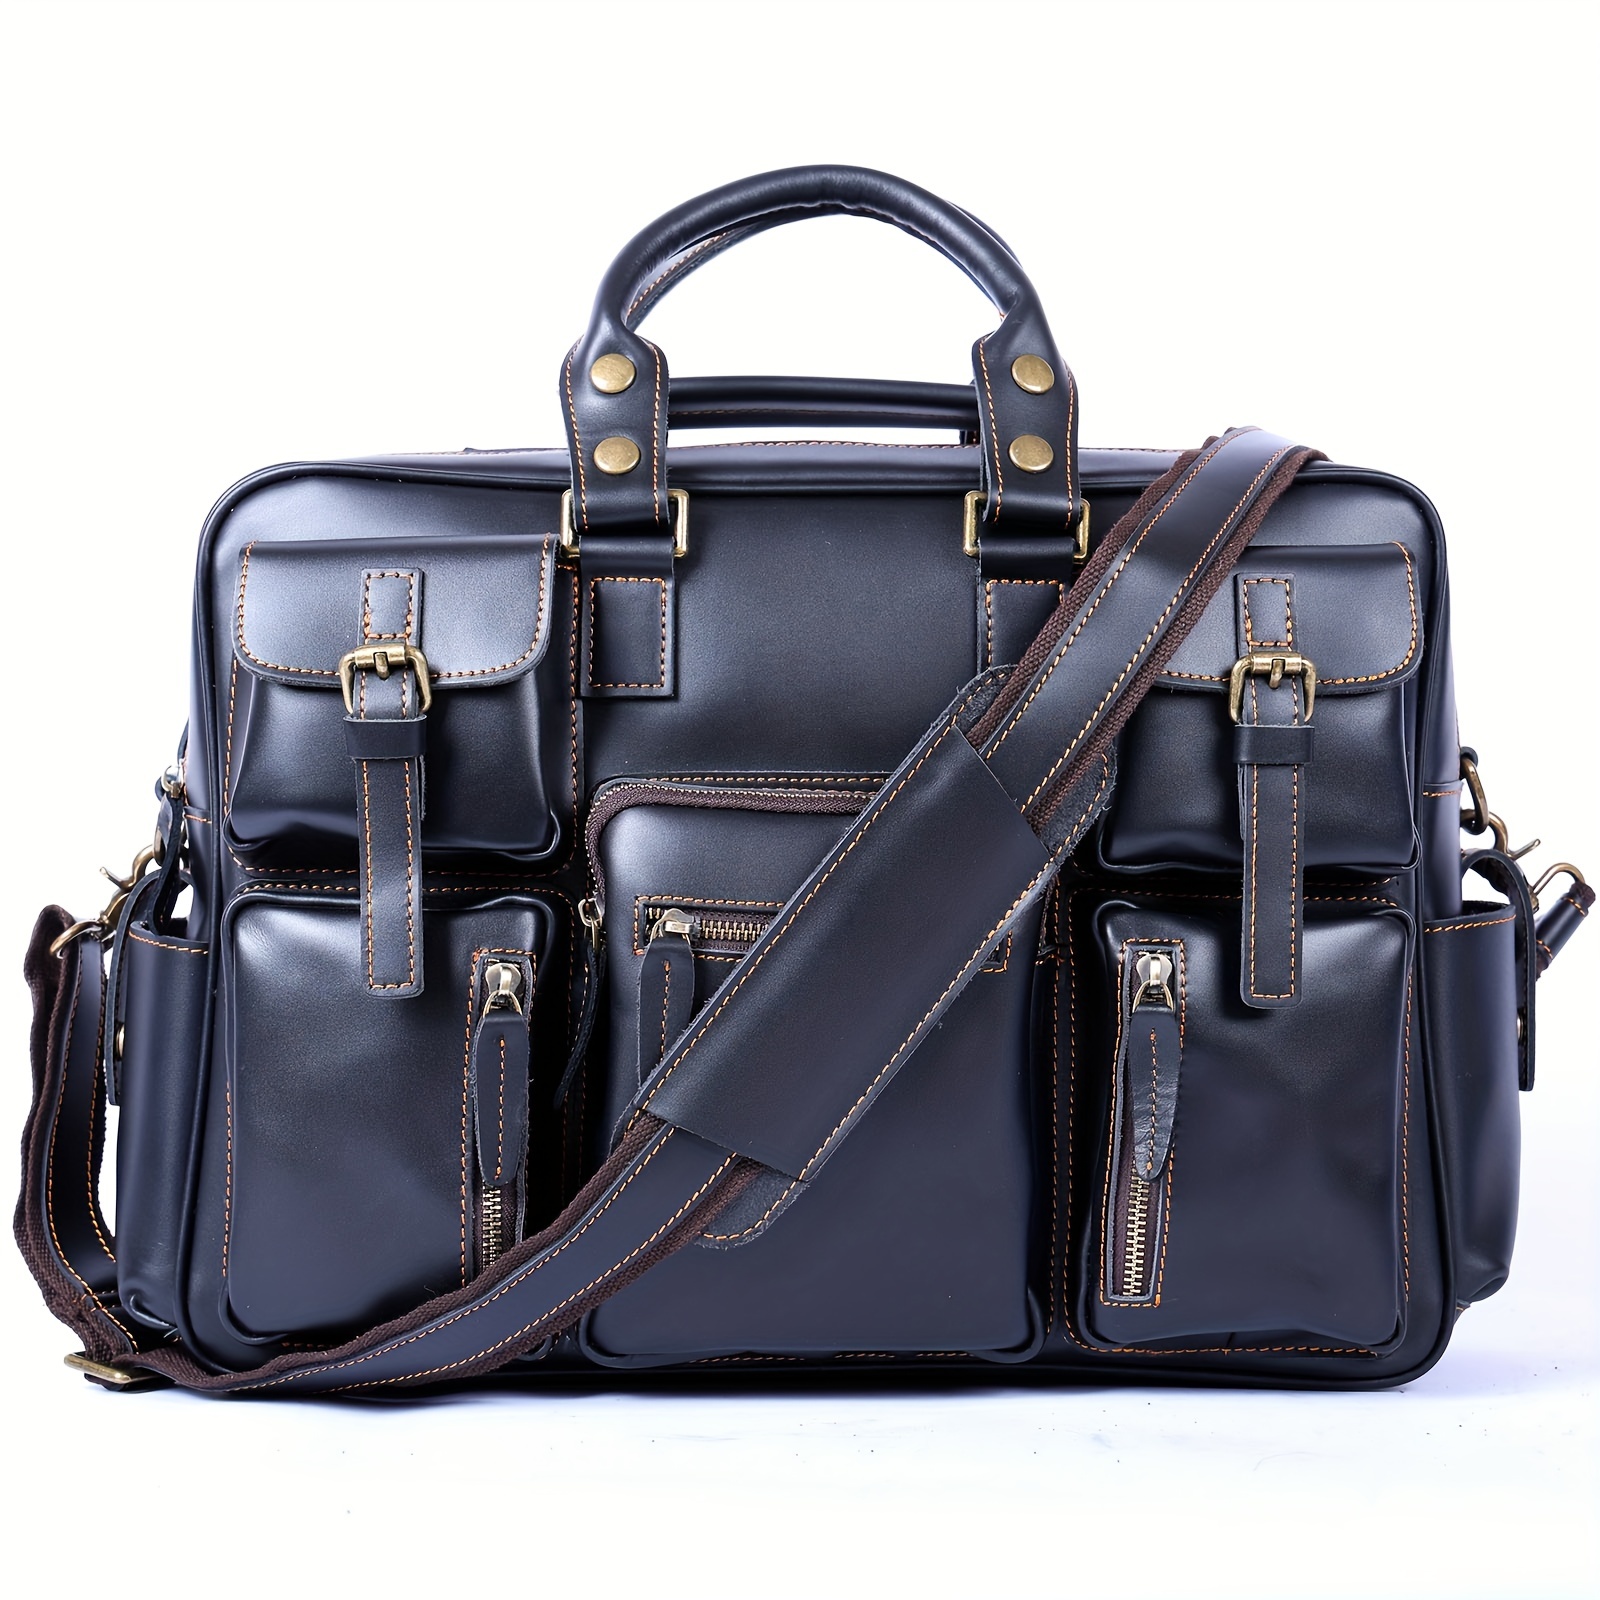 1pc Vintage Crossbody Briefcase Bag With Multiple Compartments & Laptop Sleeve For Business Trips & Traveling, Work Bags For Men\u002FWomen, - Click Image to Close